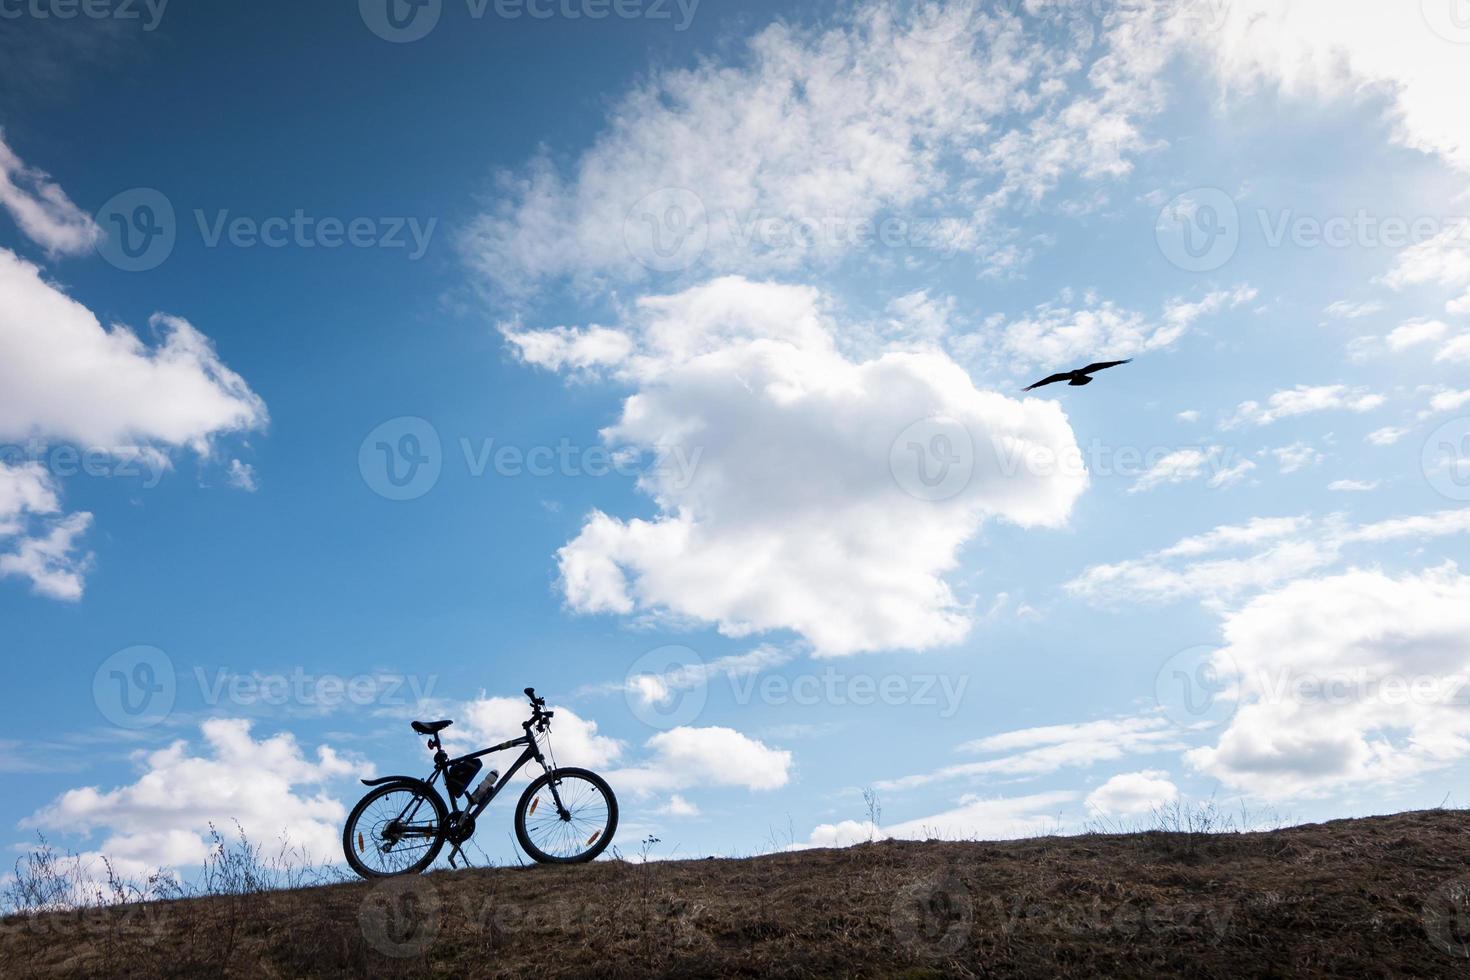 Bike silhouette in blue sky with clouds. symbol of independence and freedom with flying bird photo